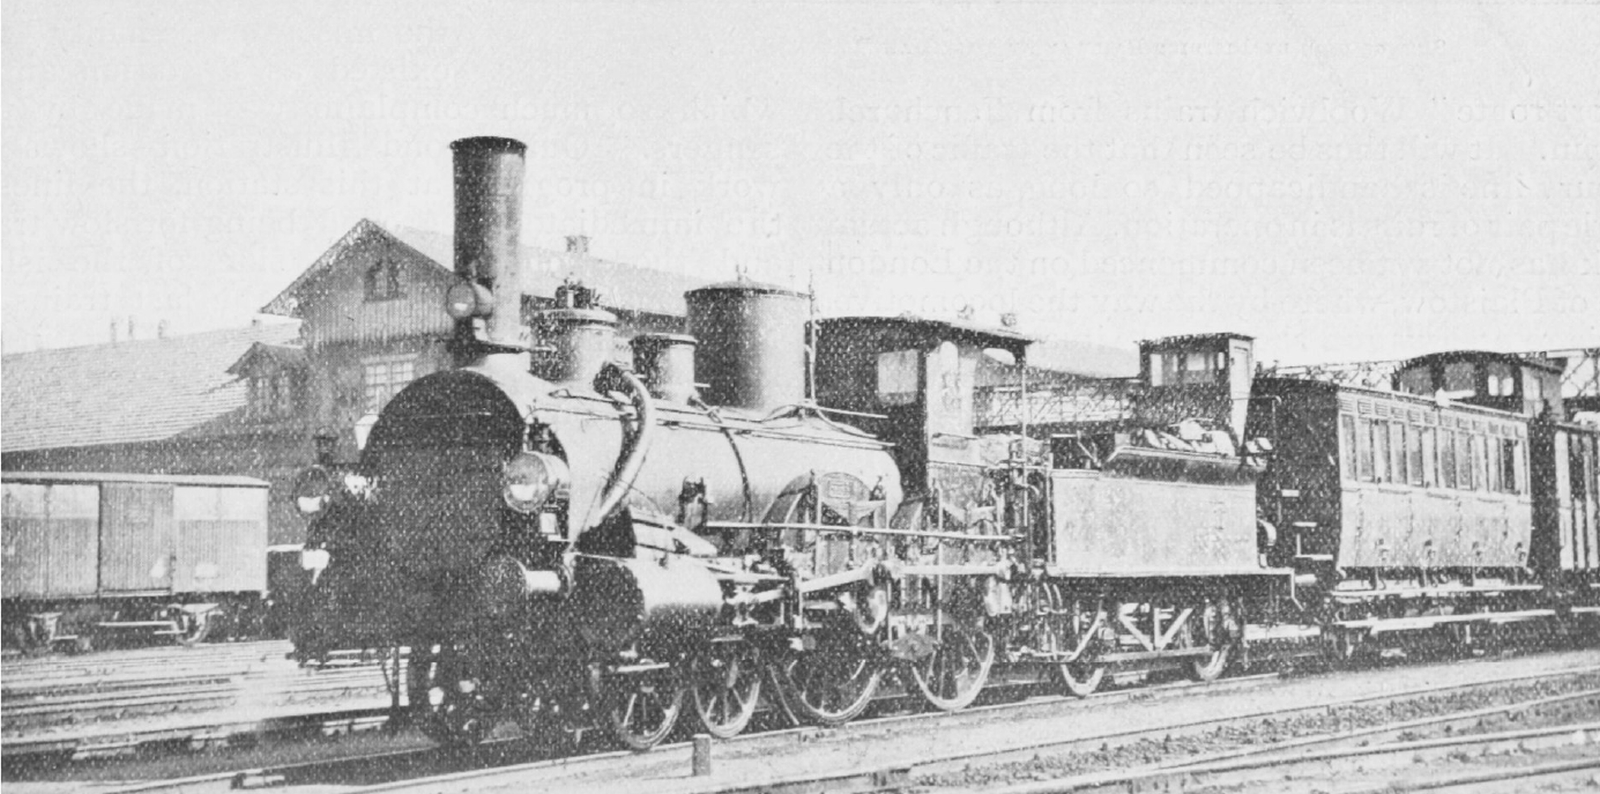 At the beginning of the 20th century, this locomotive could be found working in shunting service in Basel